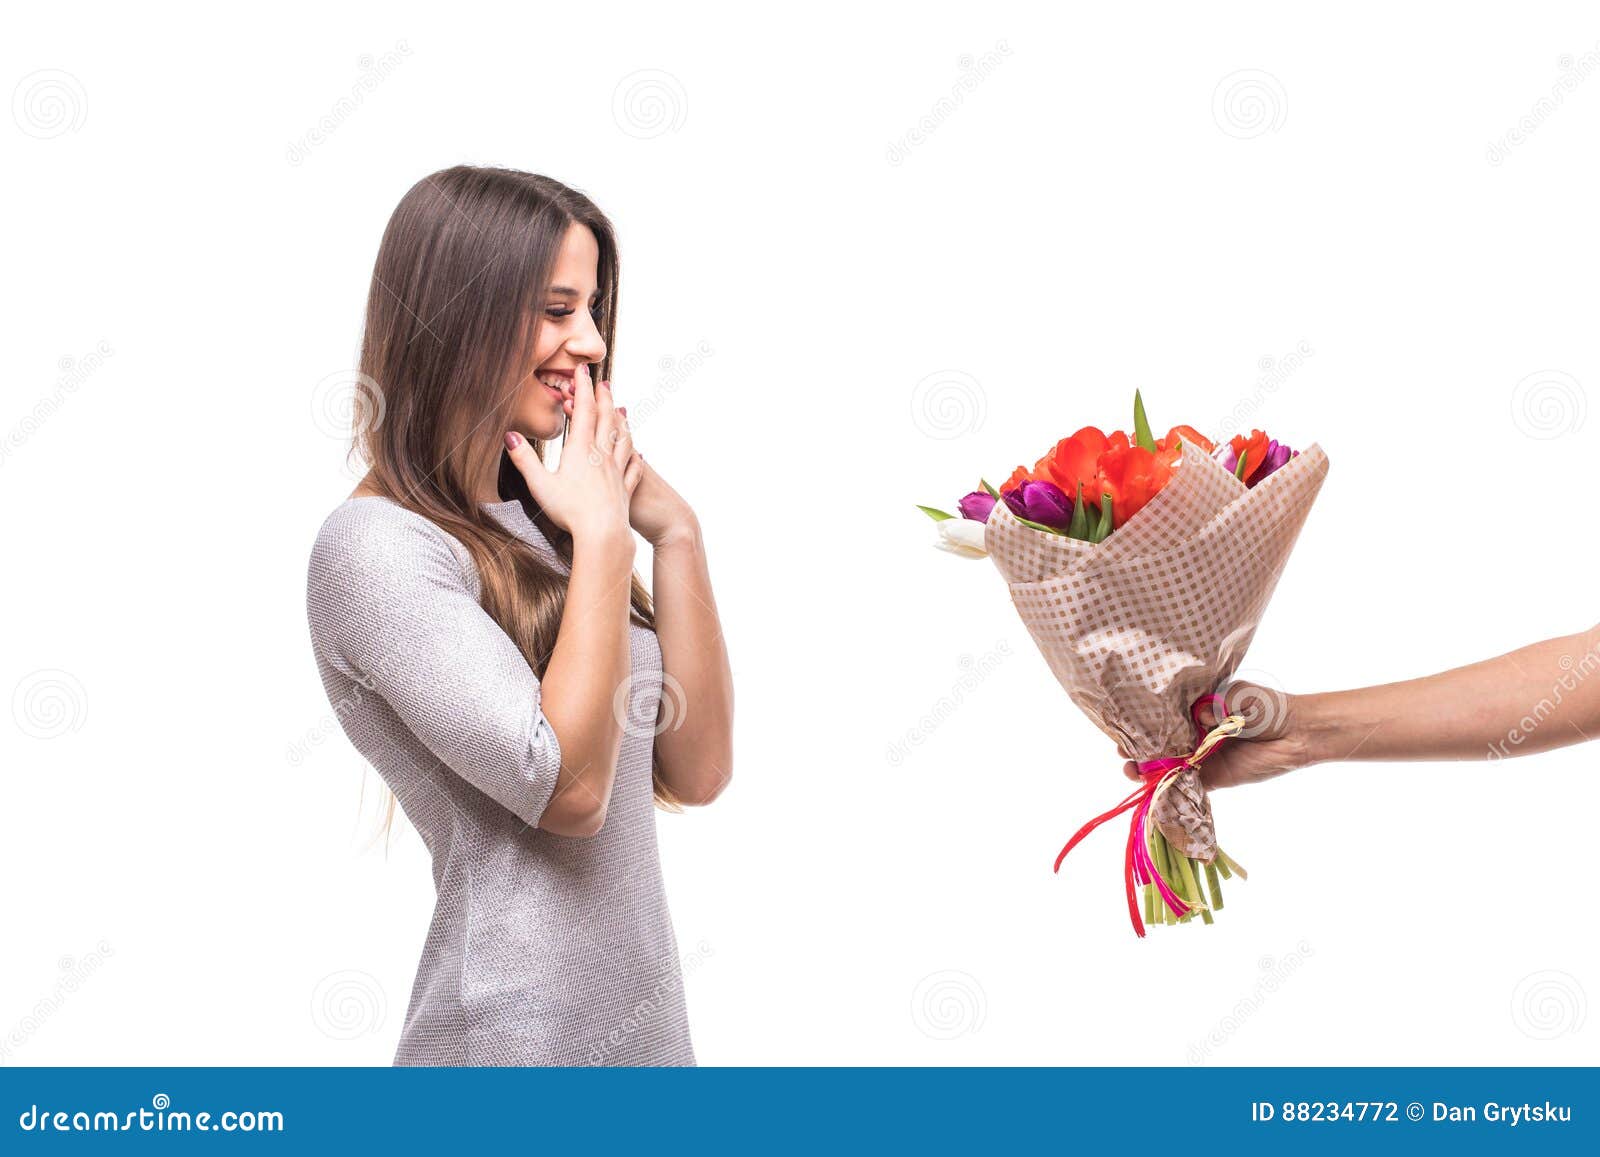 man giving a bunch of flowers and surprised woman 